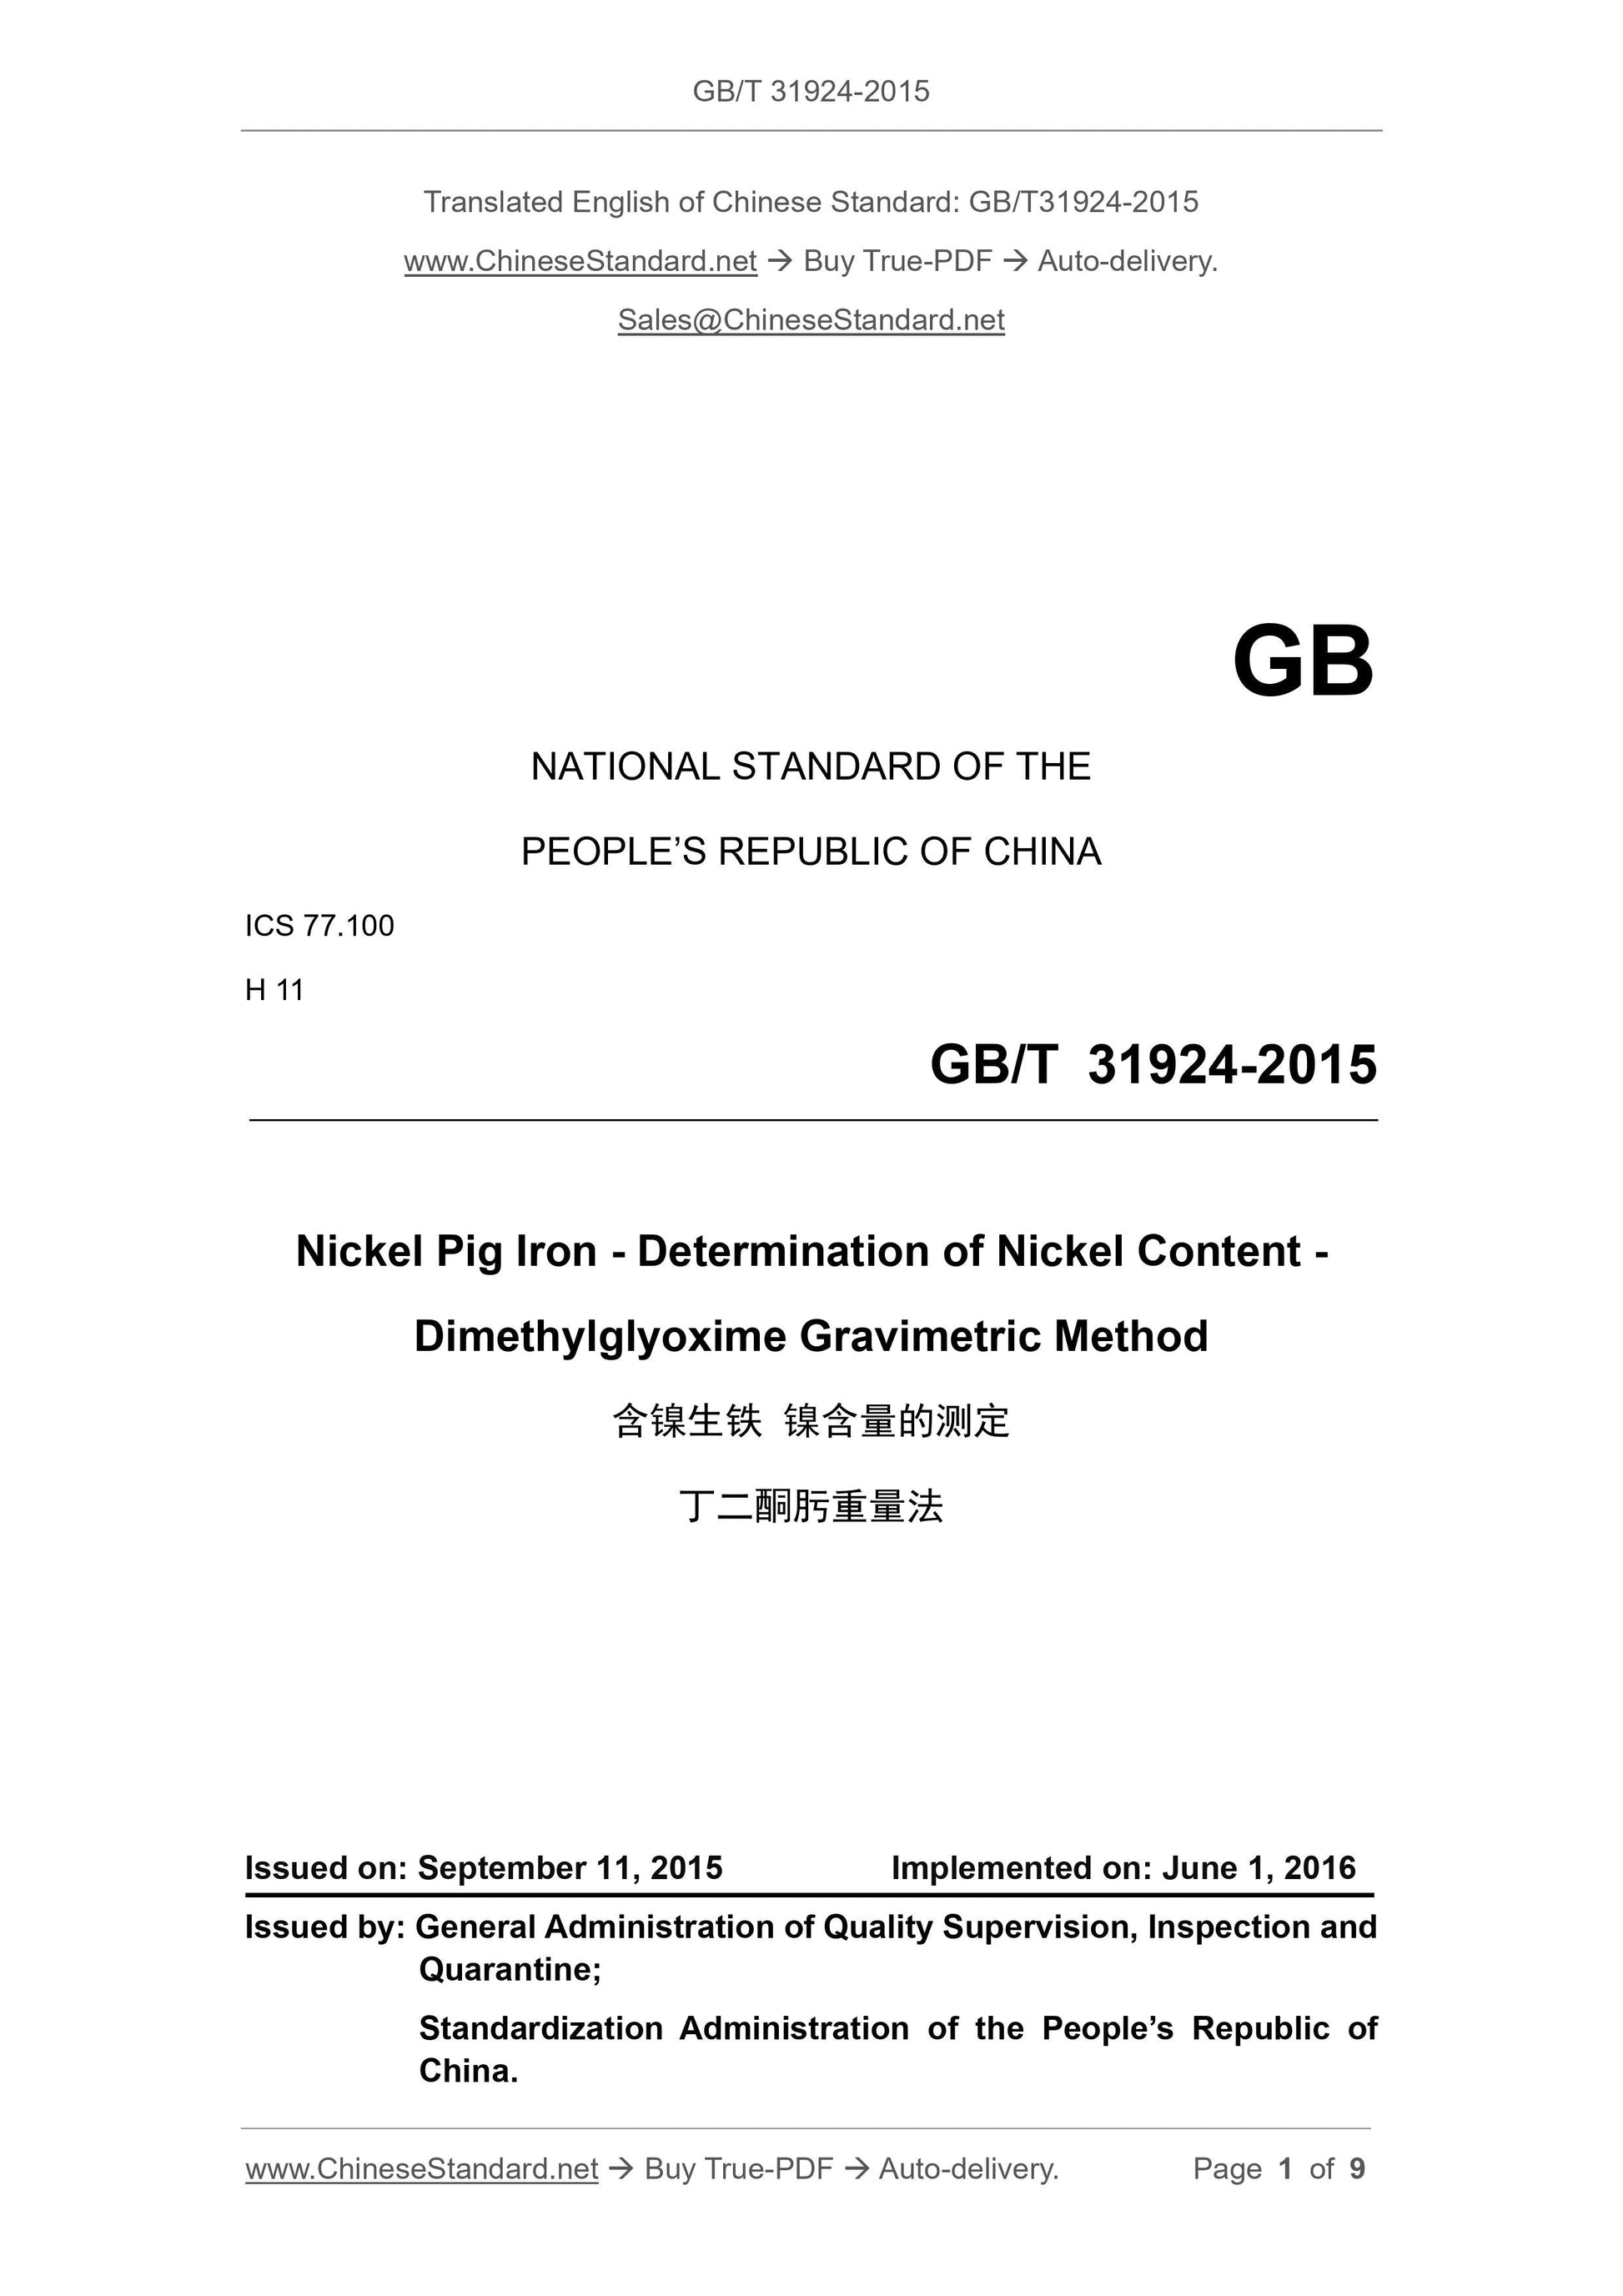 GB/T 31924-2015 Page 1